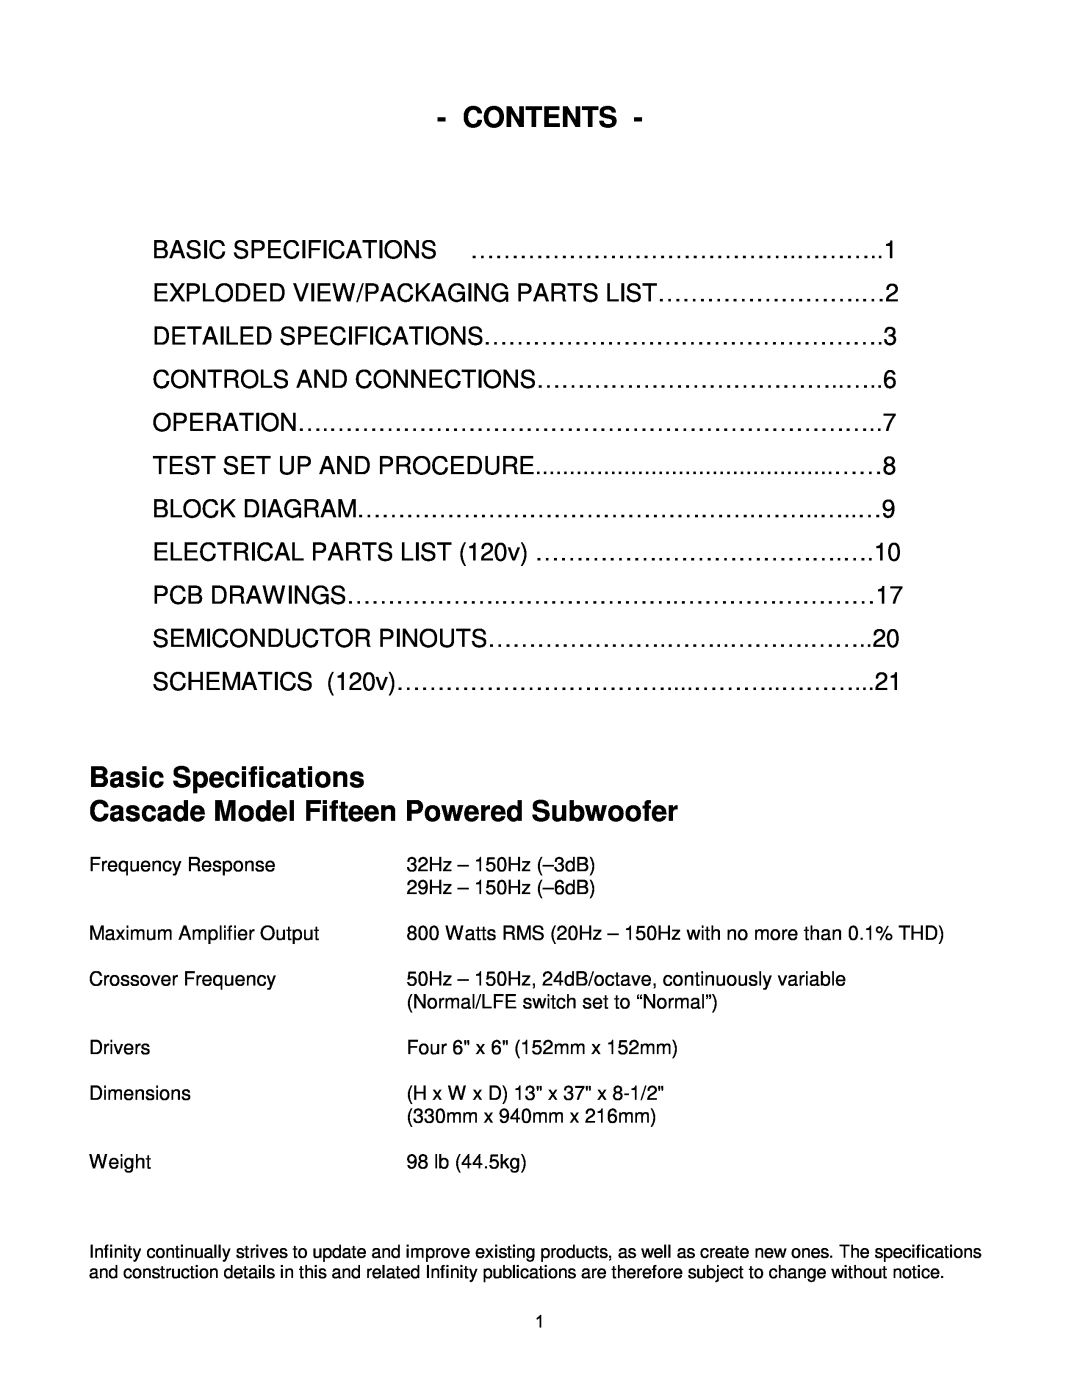 Infinity FIFTEEN service manual Contents, Basic Specifications, Cascade Model Fifteen Powered Subwoofer 